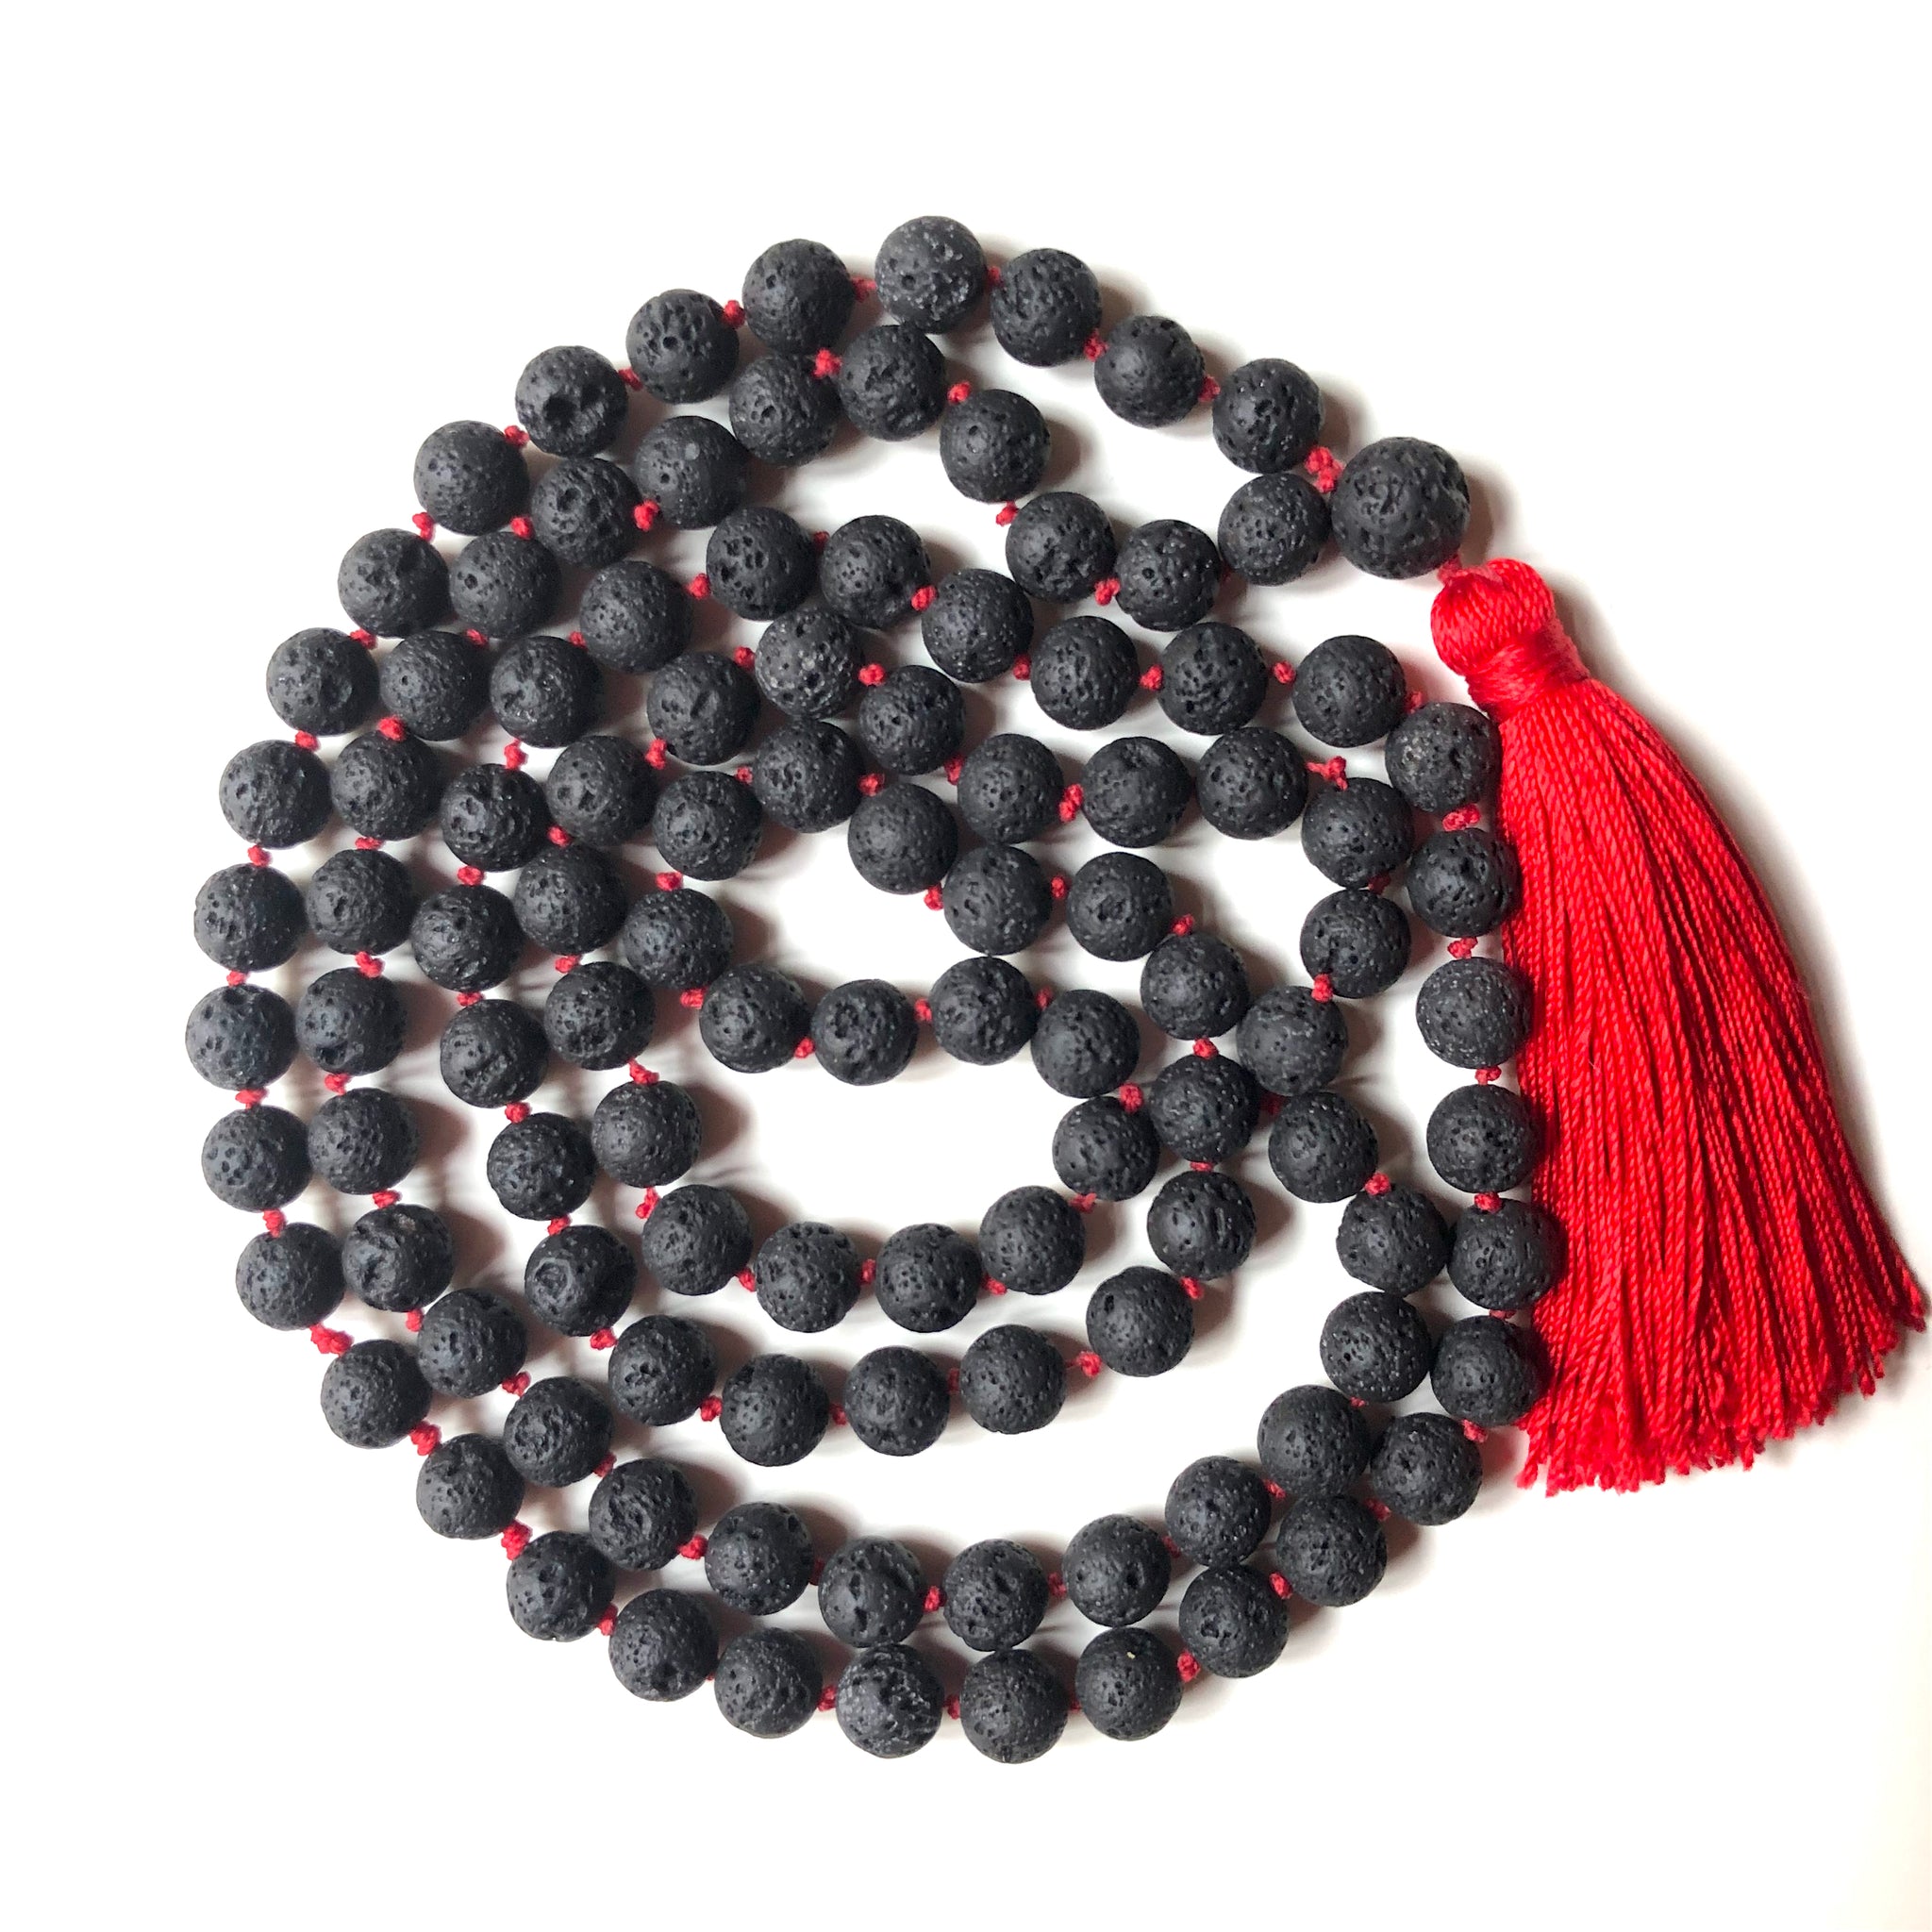 Linsoir Beads 10 pcs Red Tassels 4.7 inches Large Long Tassel for Jewelry  Making